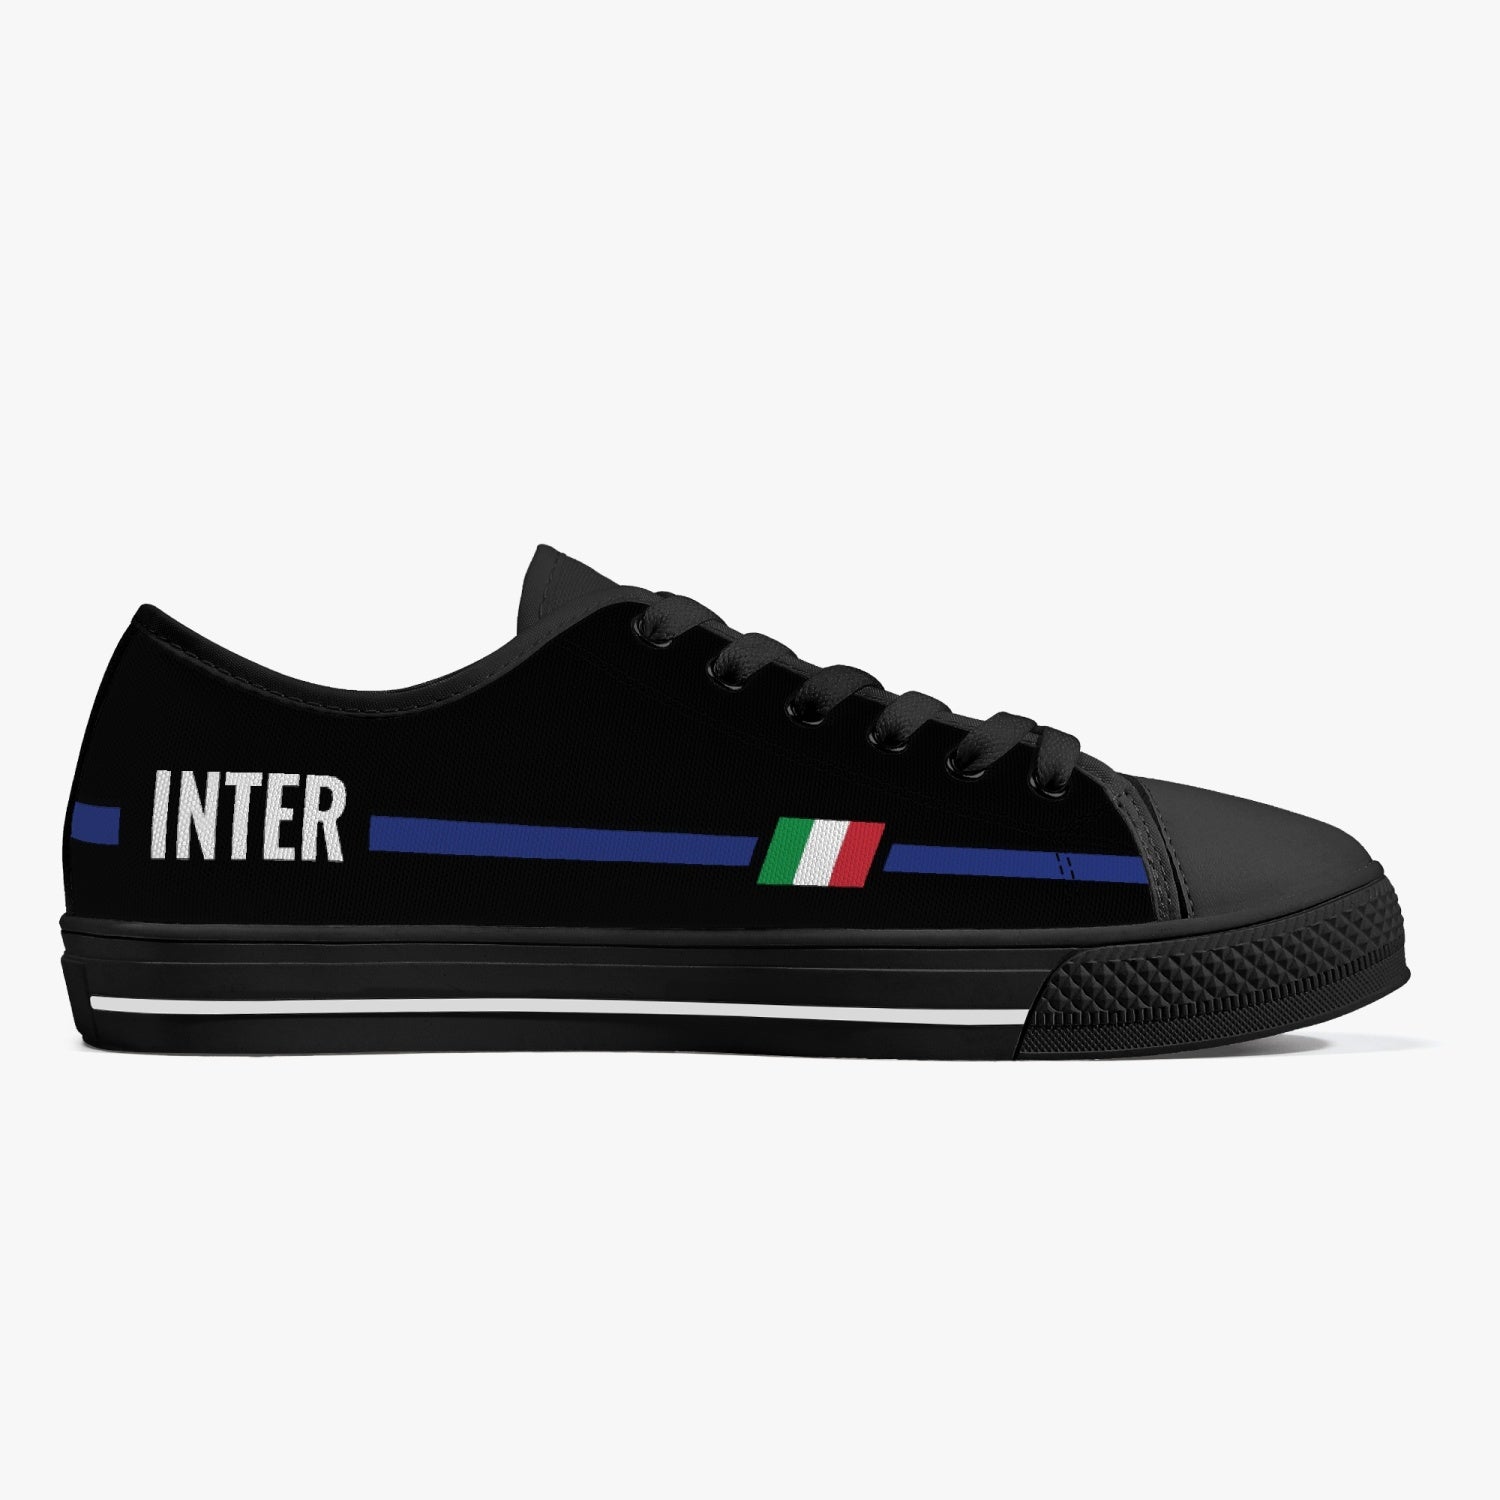 Inter Shoes & Sneakers for Inter fans Italiadistrict.com